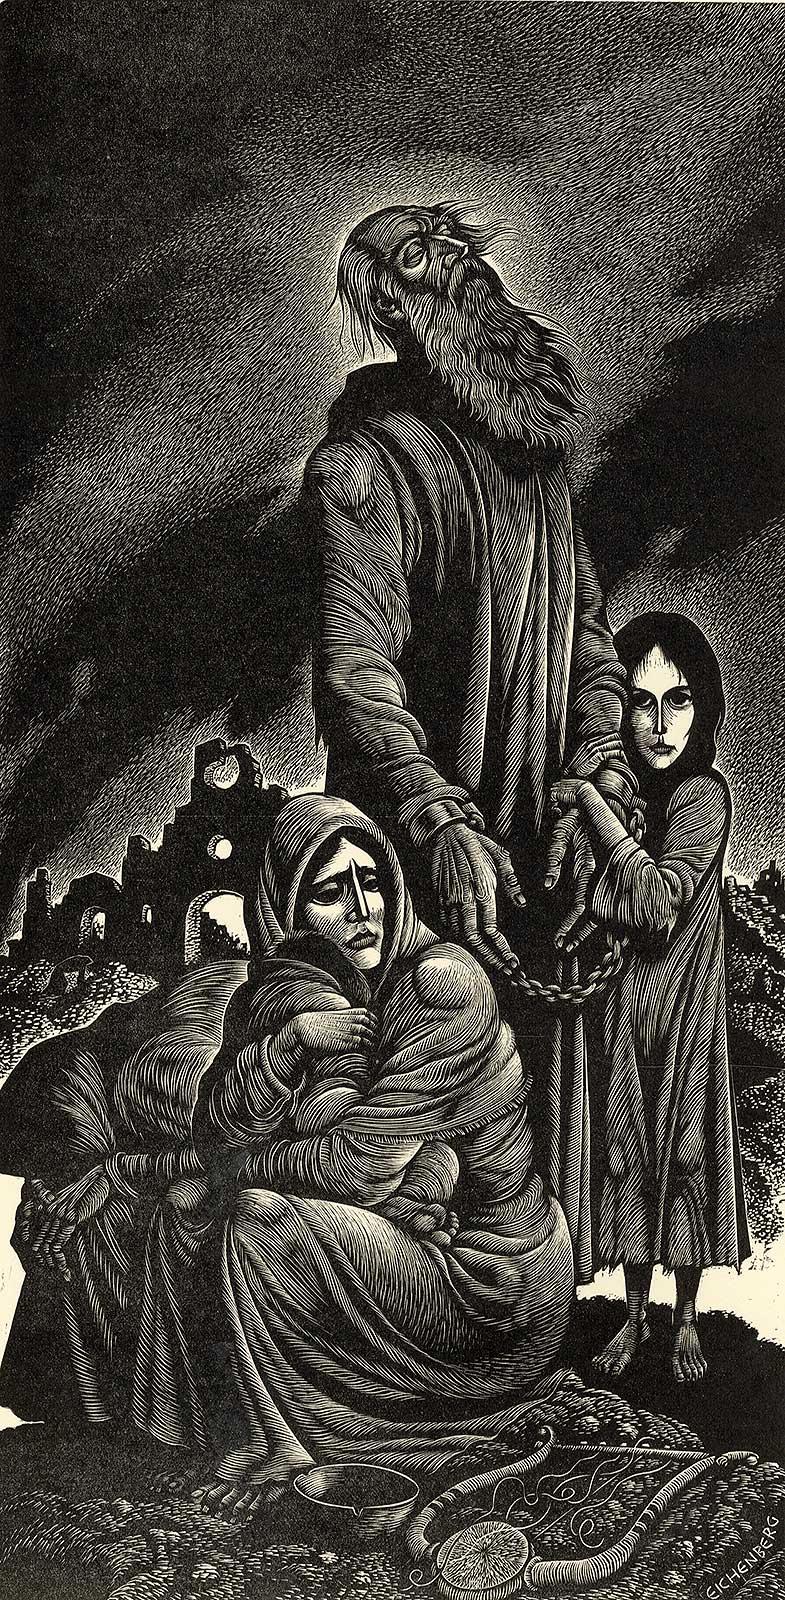 Fritz Eichenberg. Figurative Print - The Lamentation of Jeremiah (biblical prophet of judgment and hope)